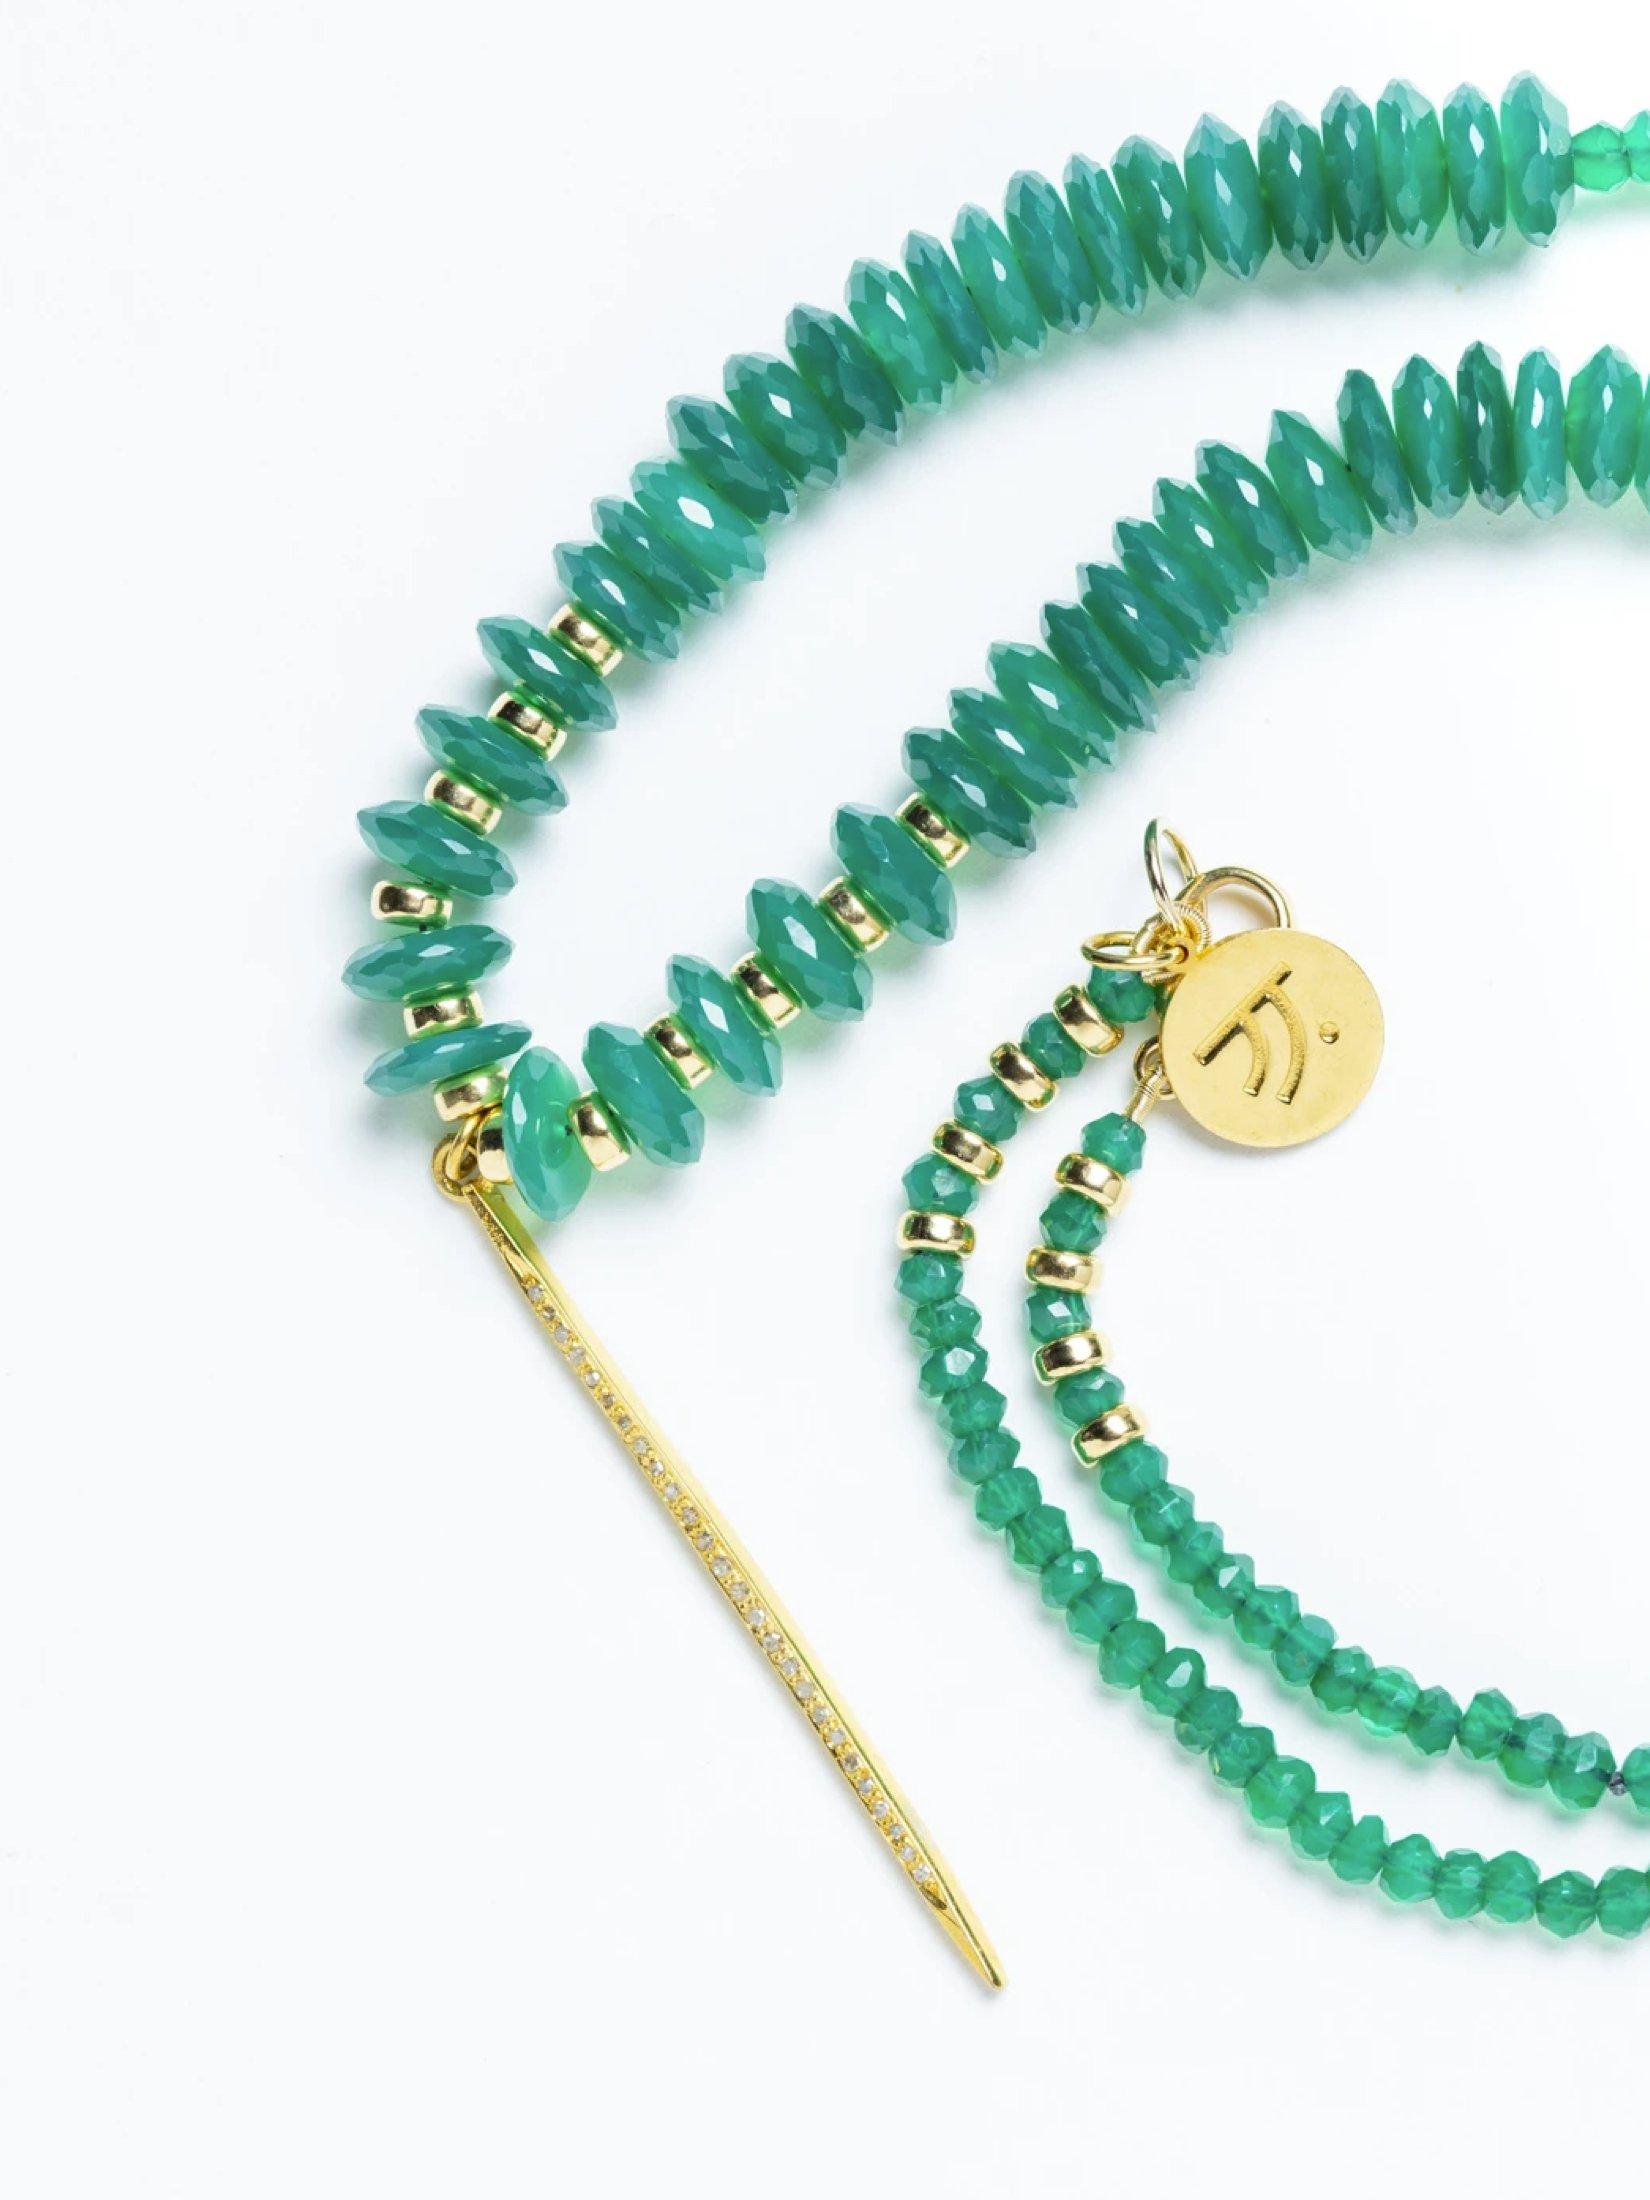 Story Behind The Necklace:
Emerald green is always a popular color year round and this necklace could not be a more stunning rich green necklace.  The quality and cut of the stones make for a spectacular statement necklace.

Properties:
Green onyx